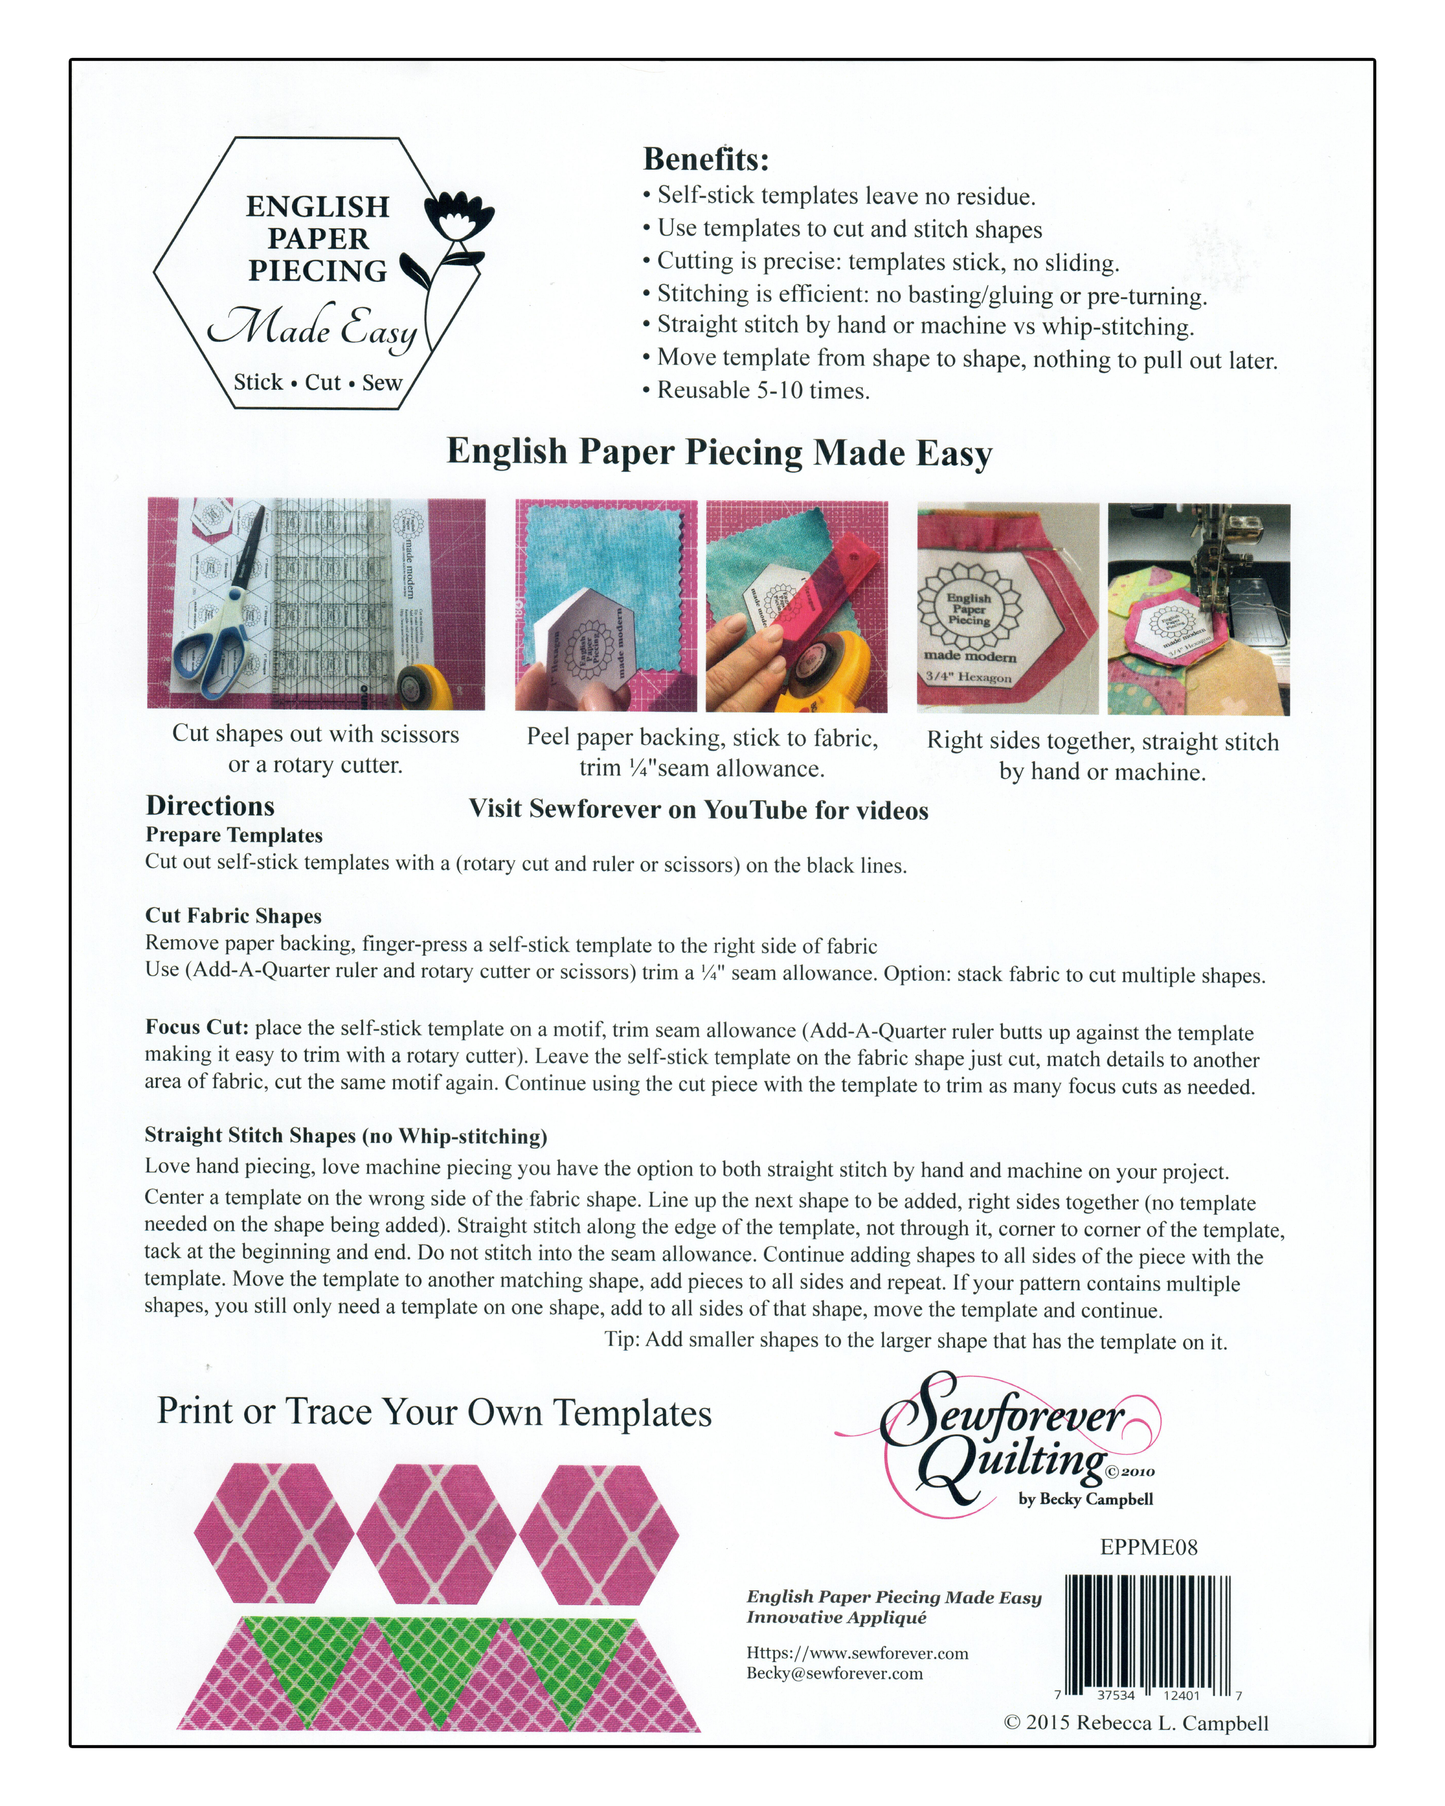 English Paper Piecing Made Easy,  Self-stick Templates.  No basting/gluing, whip-stitching, or pulling paper.  Just move the sticker from shape to shape and straight stitch by hand or machine.  Reusable 5-10 times. 